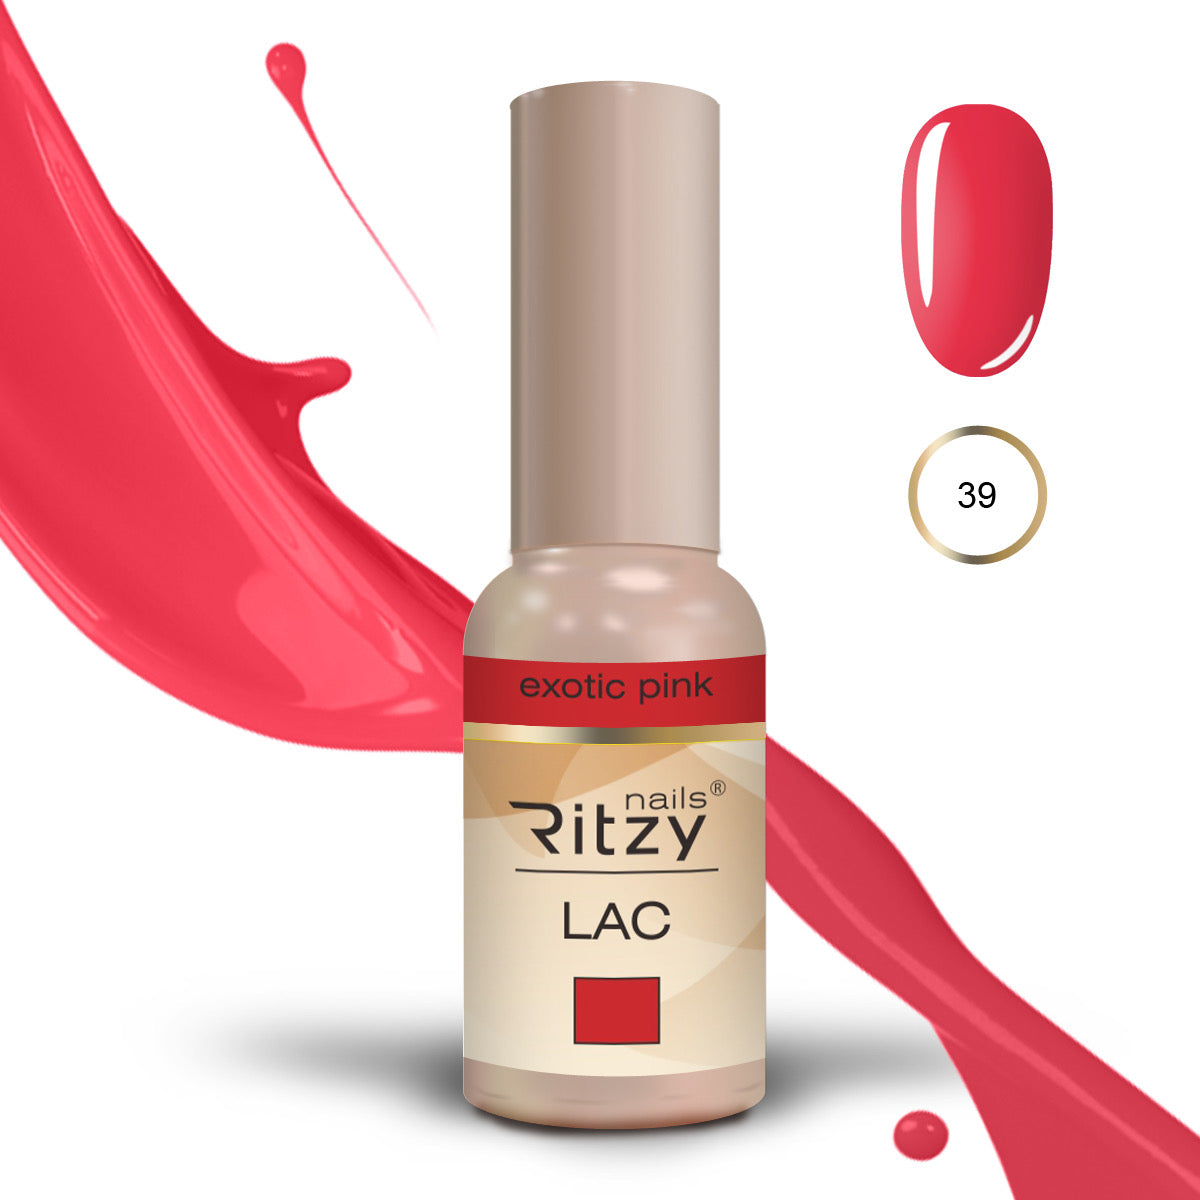 Ritzy Lac Exotic pink Nr 39